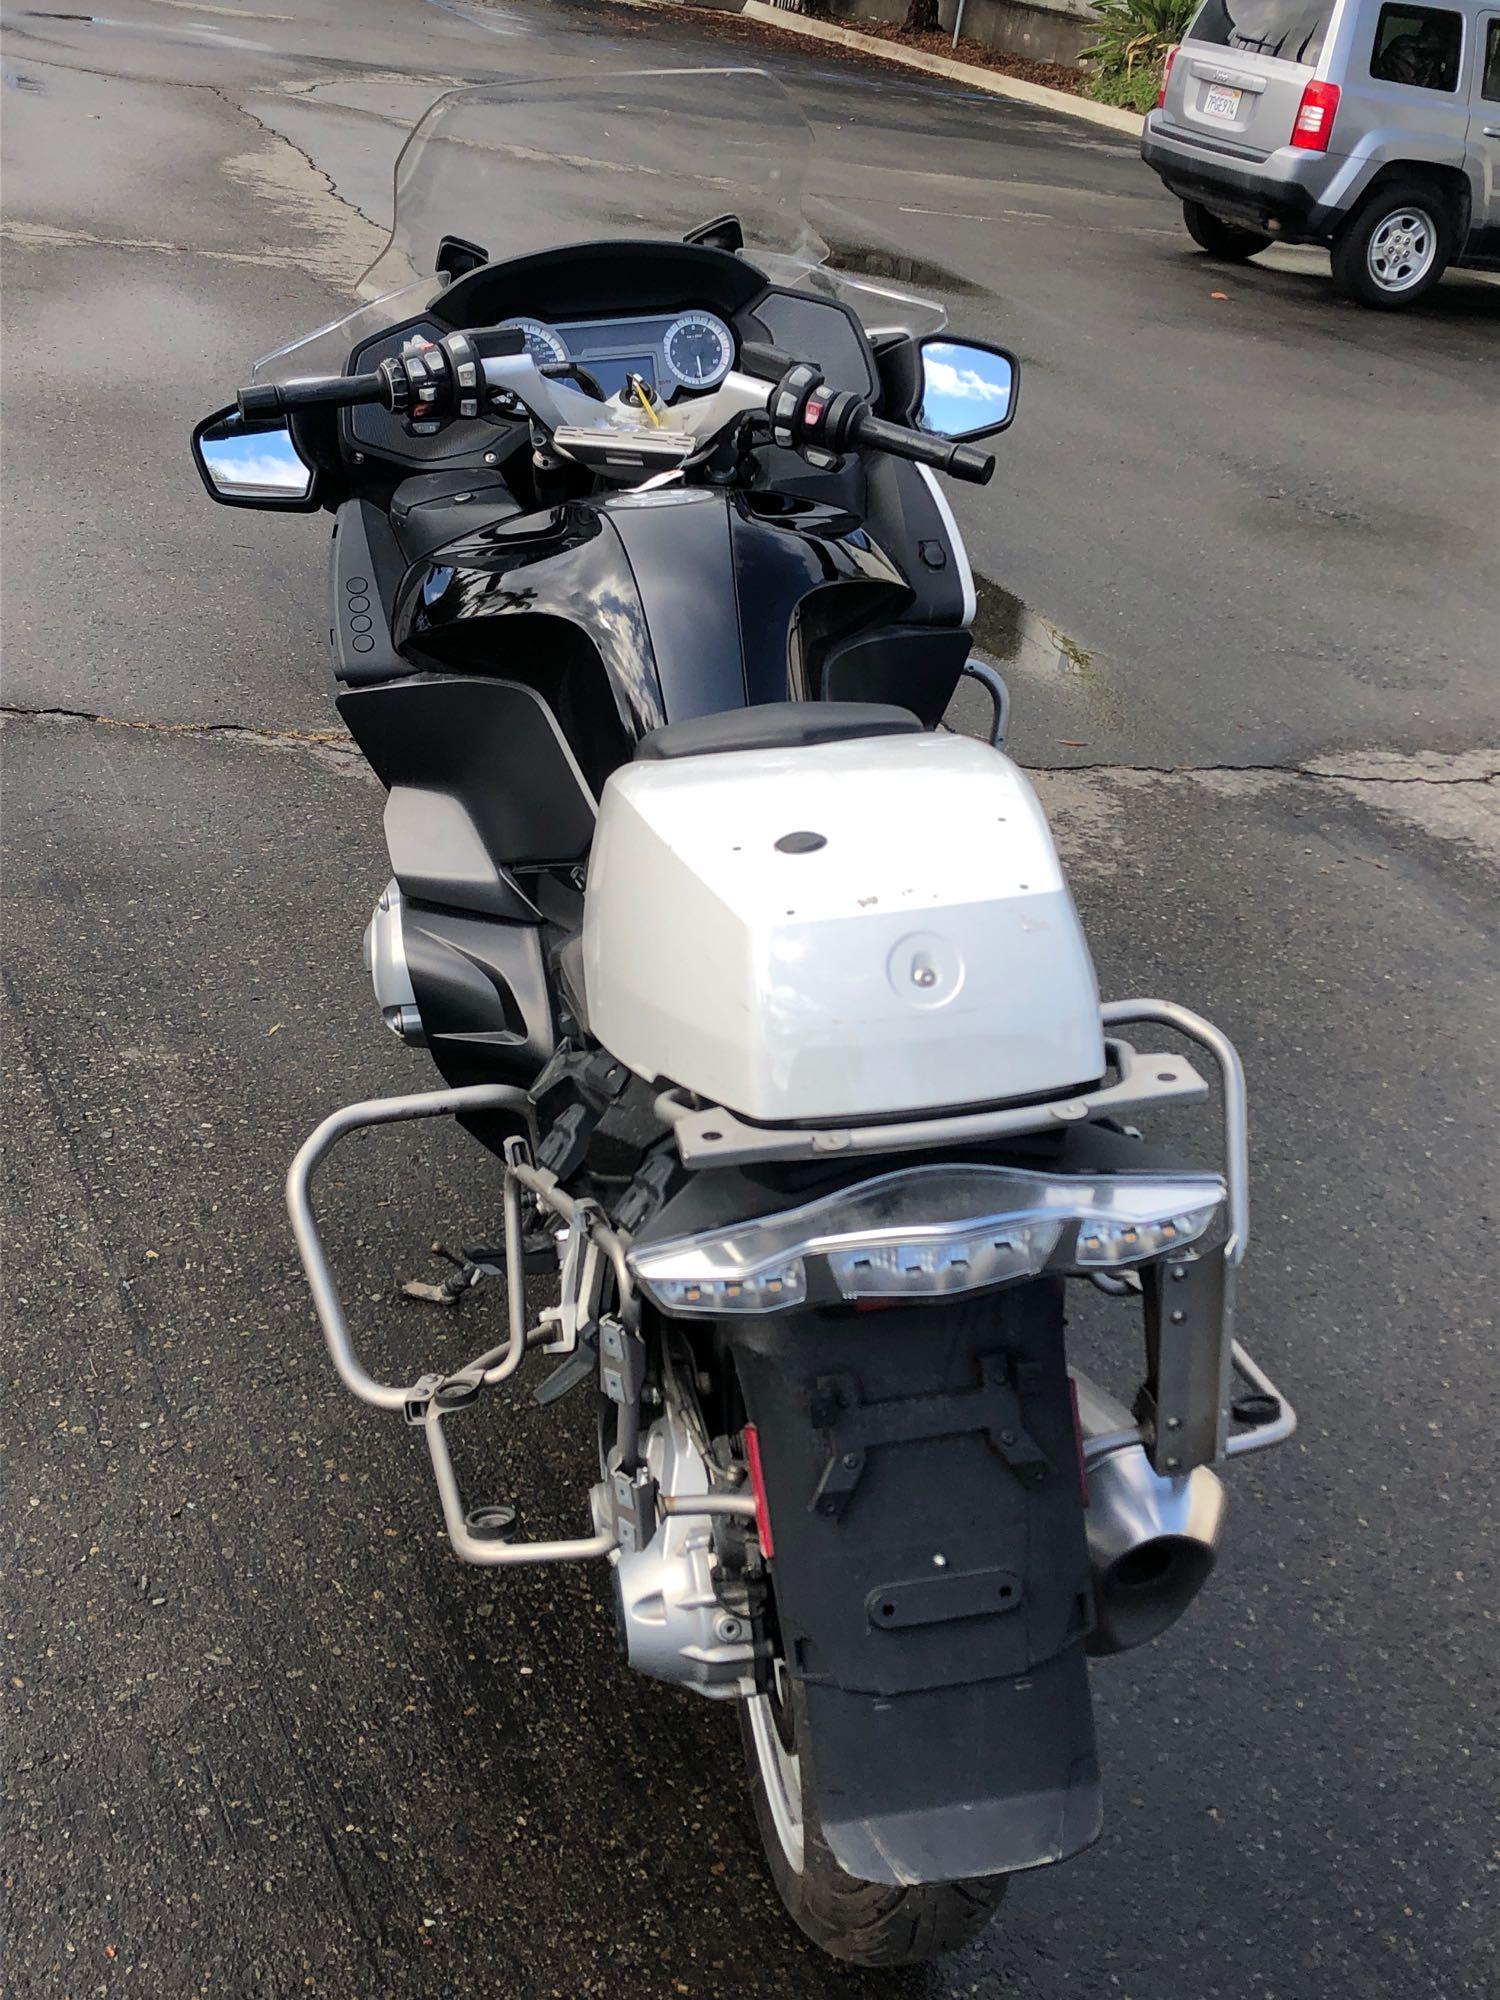 2016 BMW R1200RT-P Retired Police Motorcycle 43,195 Miles